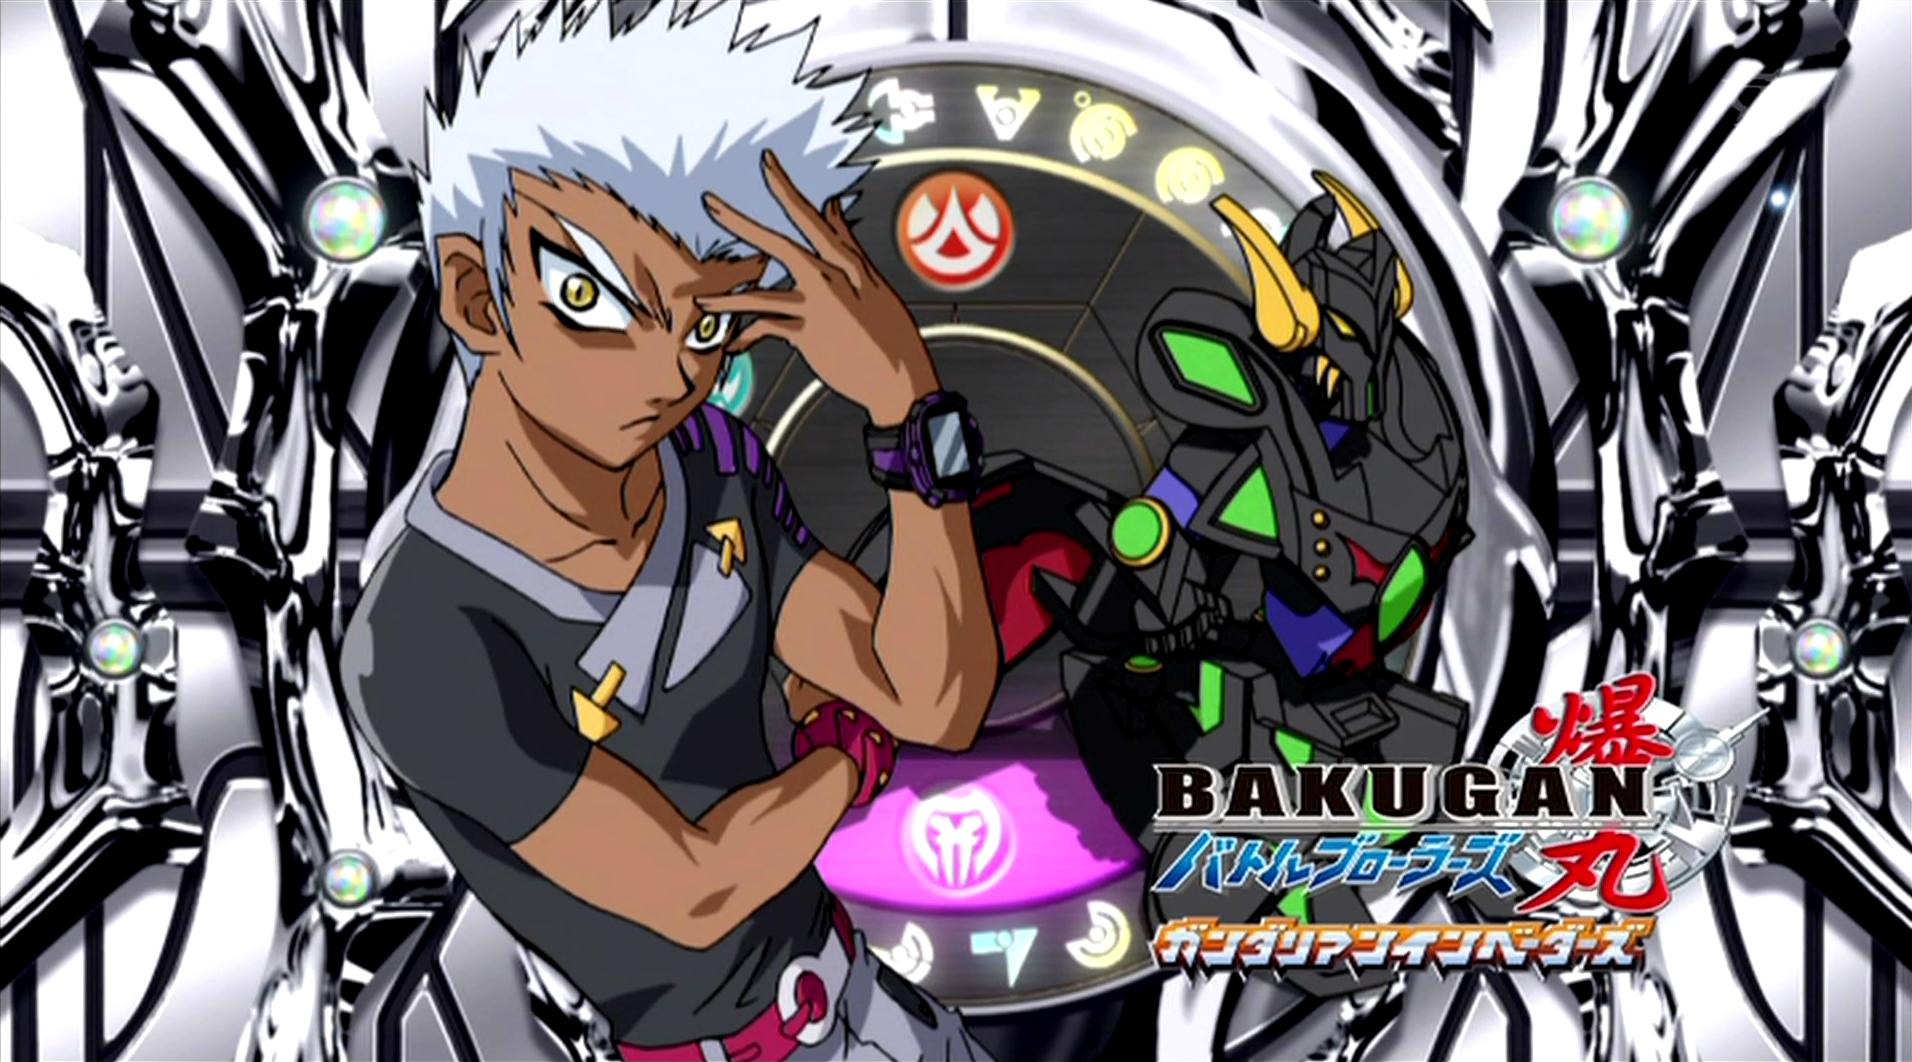 Discussion about the content page (page does not exist) t. Bakugan ren.jpg....